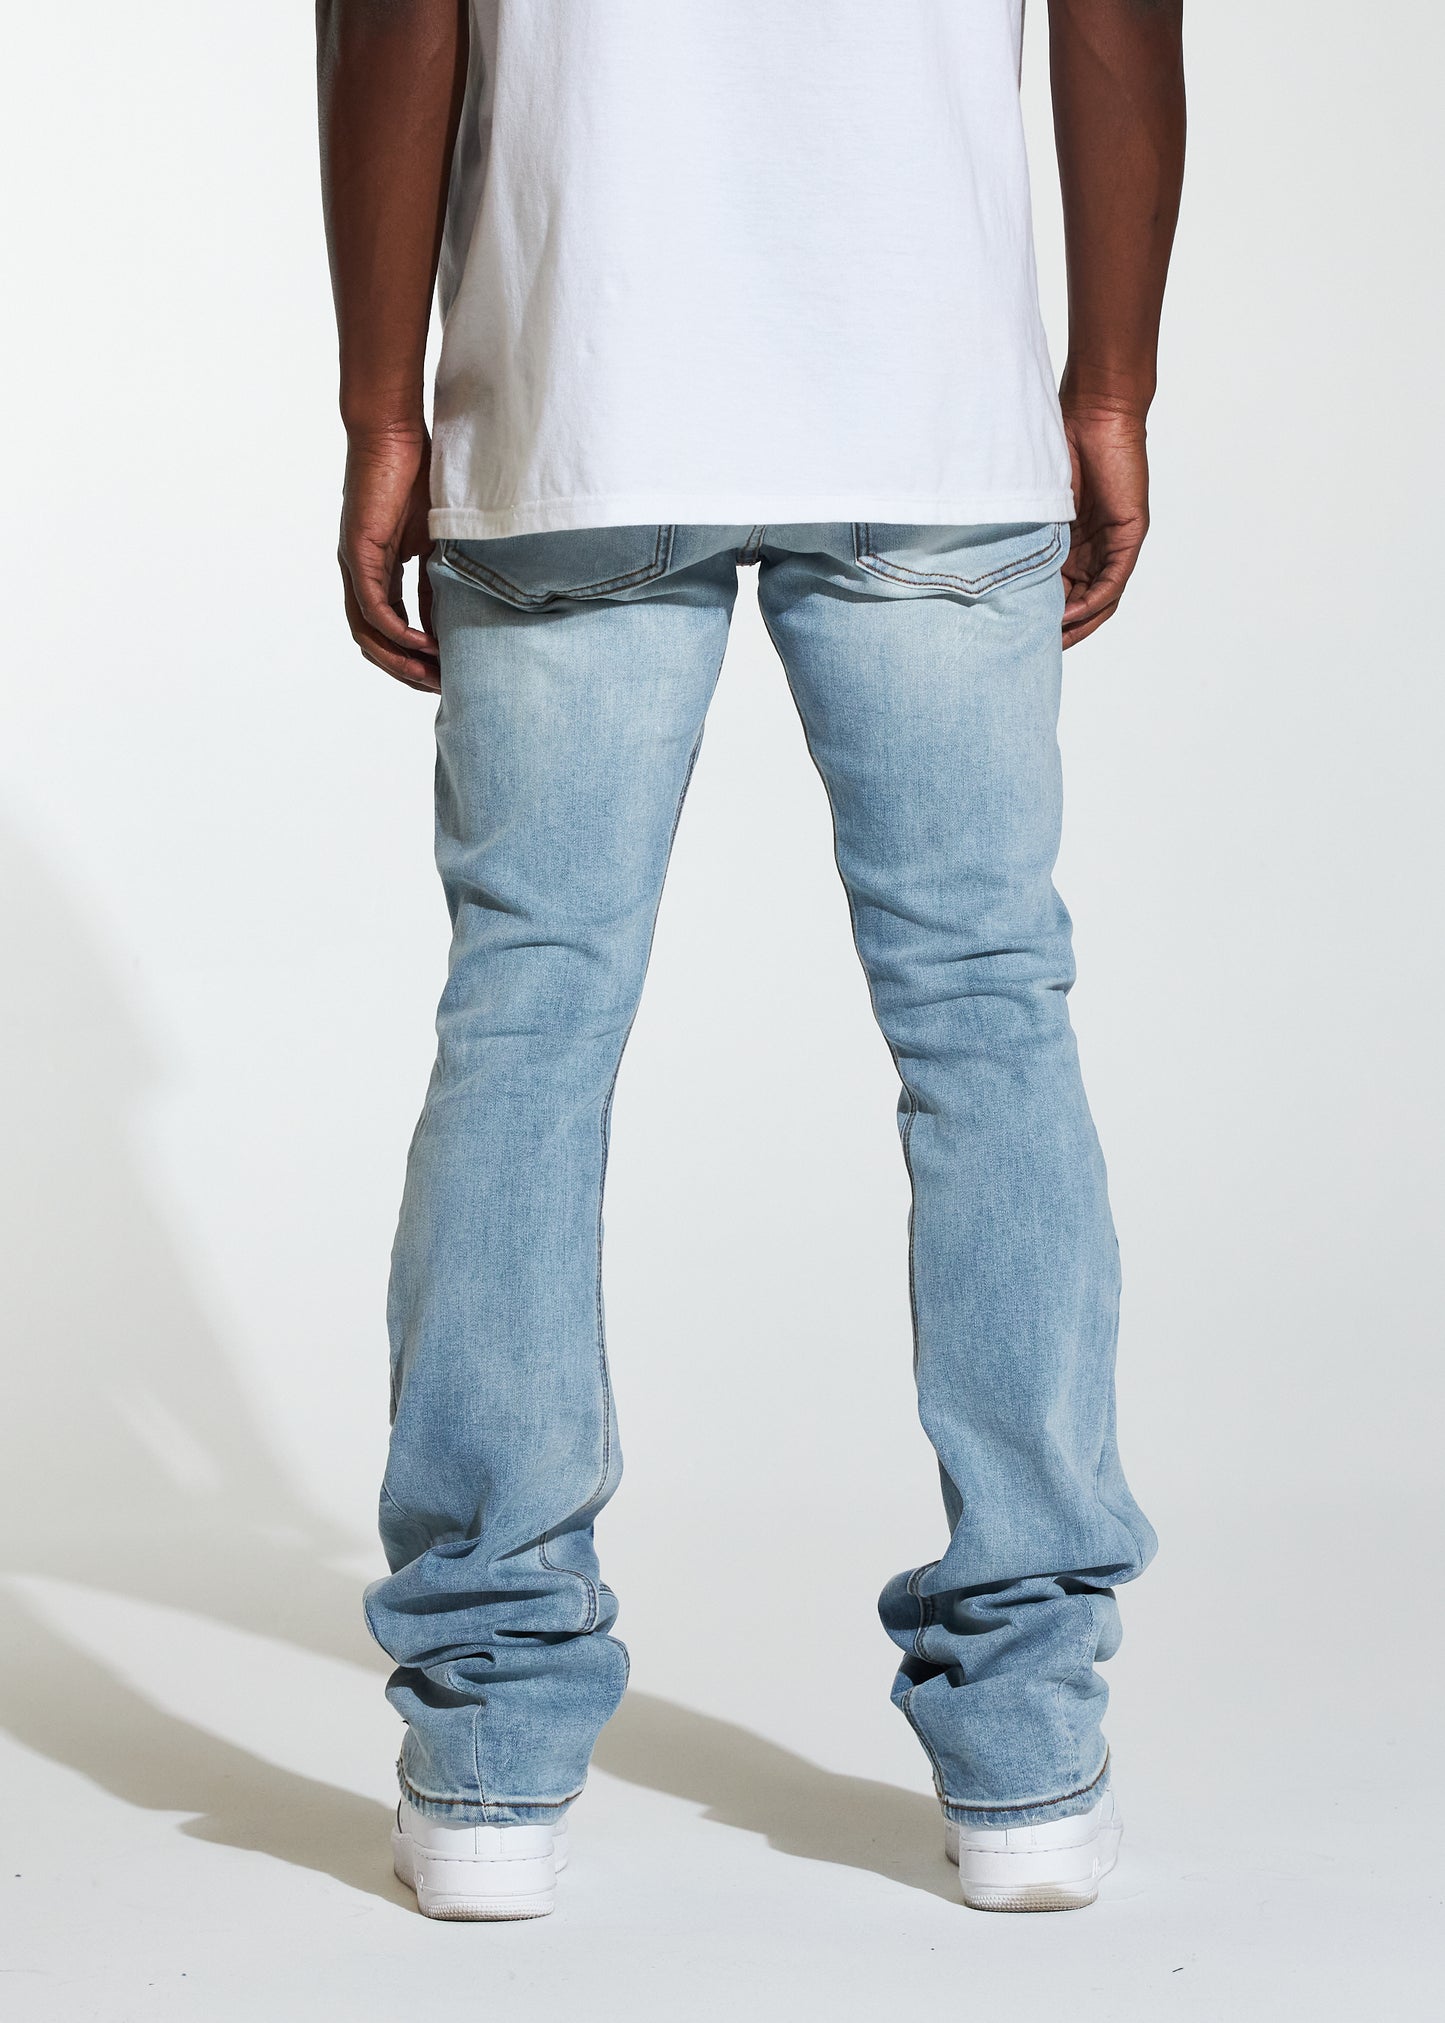 Crysp - Arch Stacked Flare Denim - Light Wash